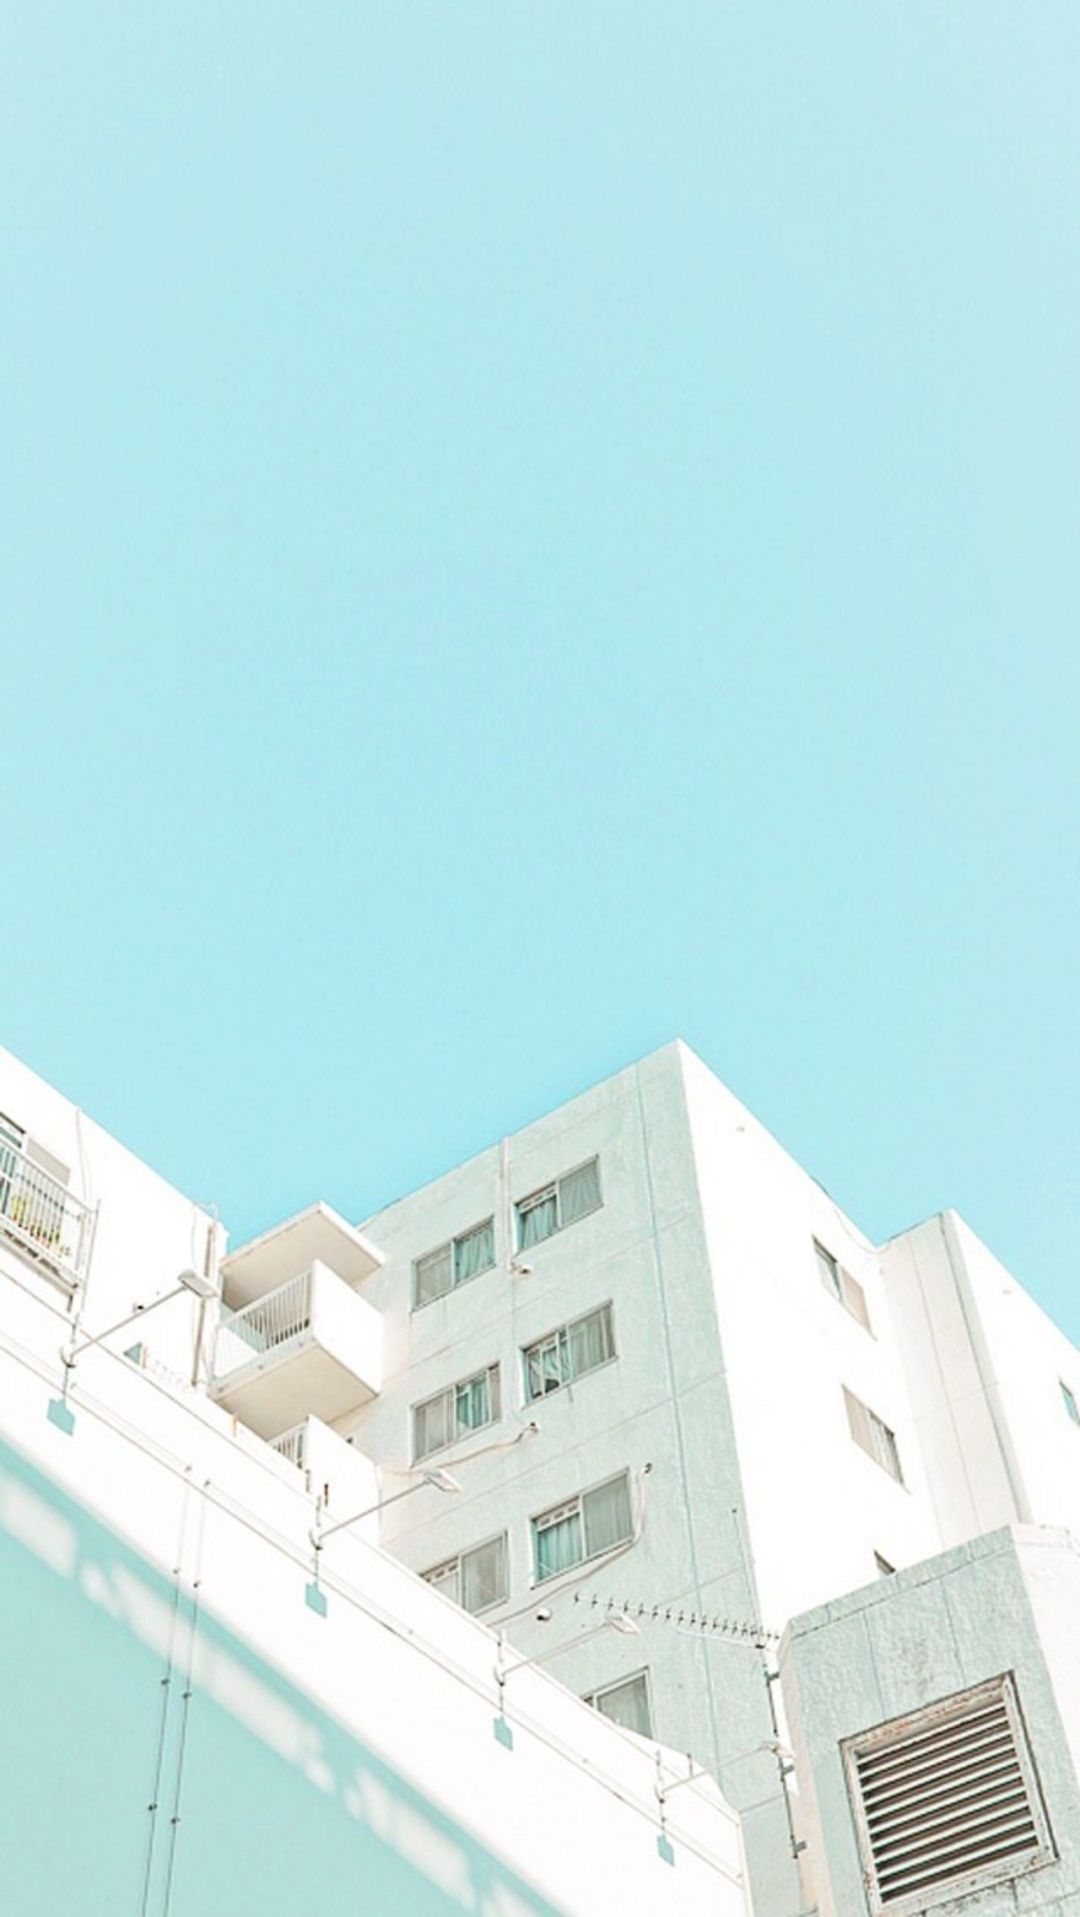 Pastel Aesthetic City Iphone Wallpapers